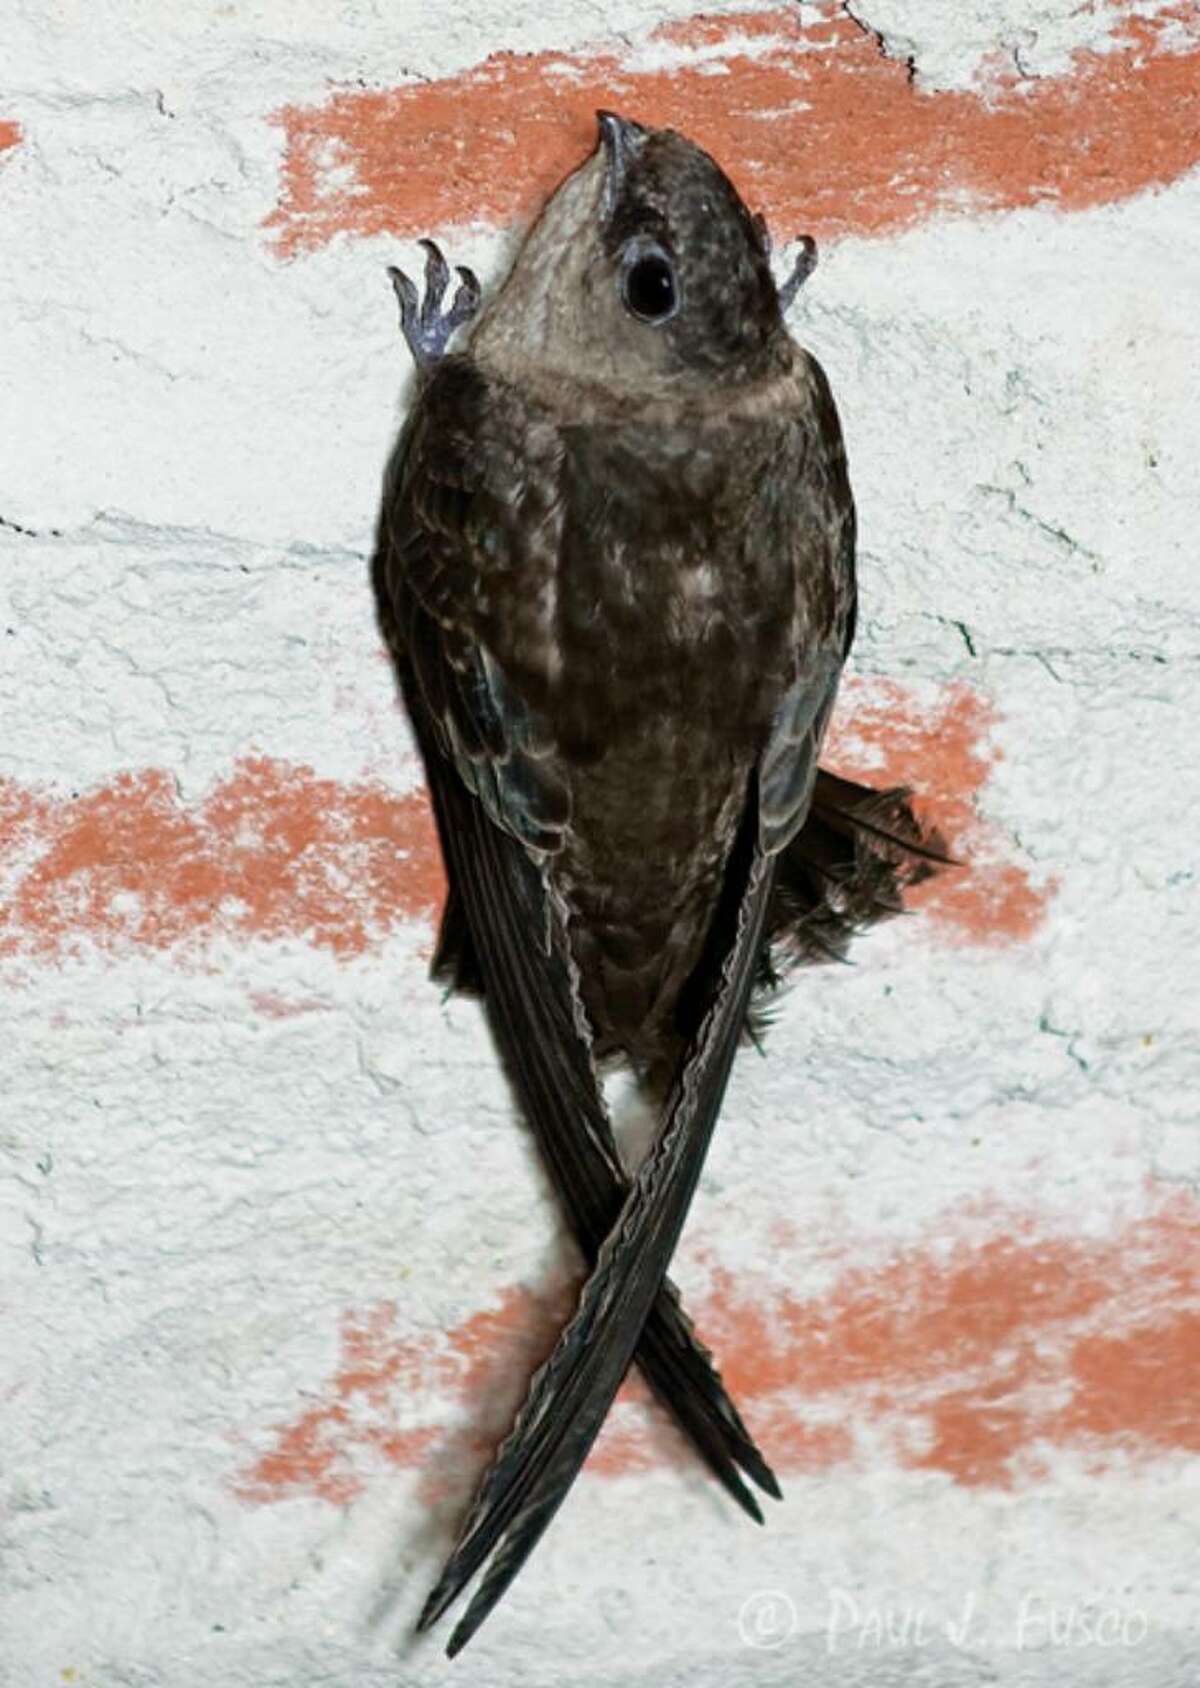 Paul Fusco/Conn. DEP The chimney swift, once one of the more common birds a few decades ago, has become difficult to find in recent years, and some biologists fear that they are in sharp decline.